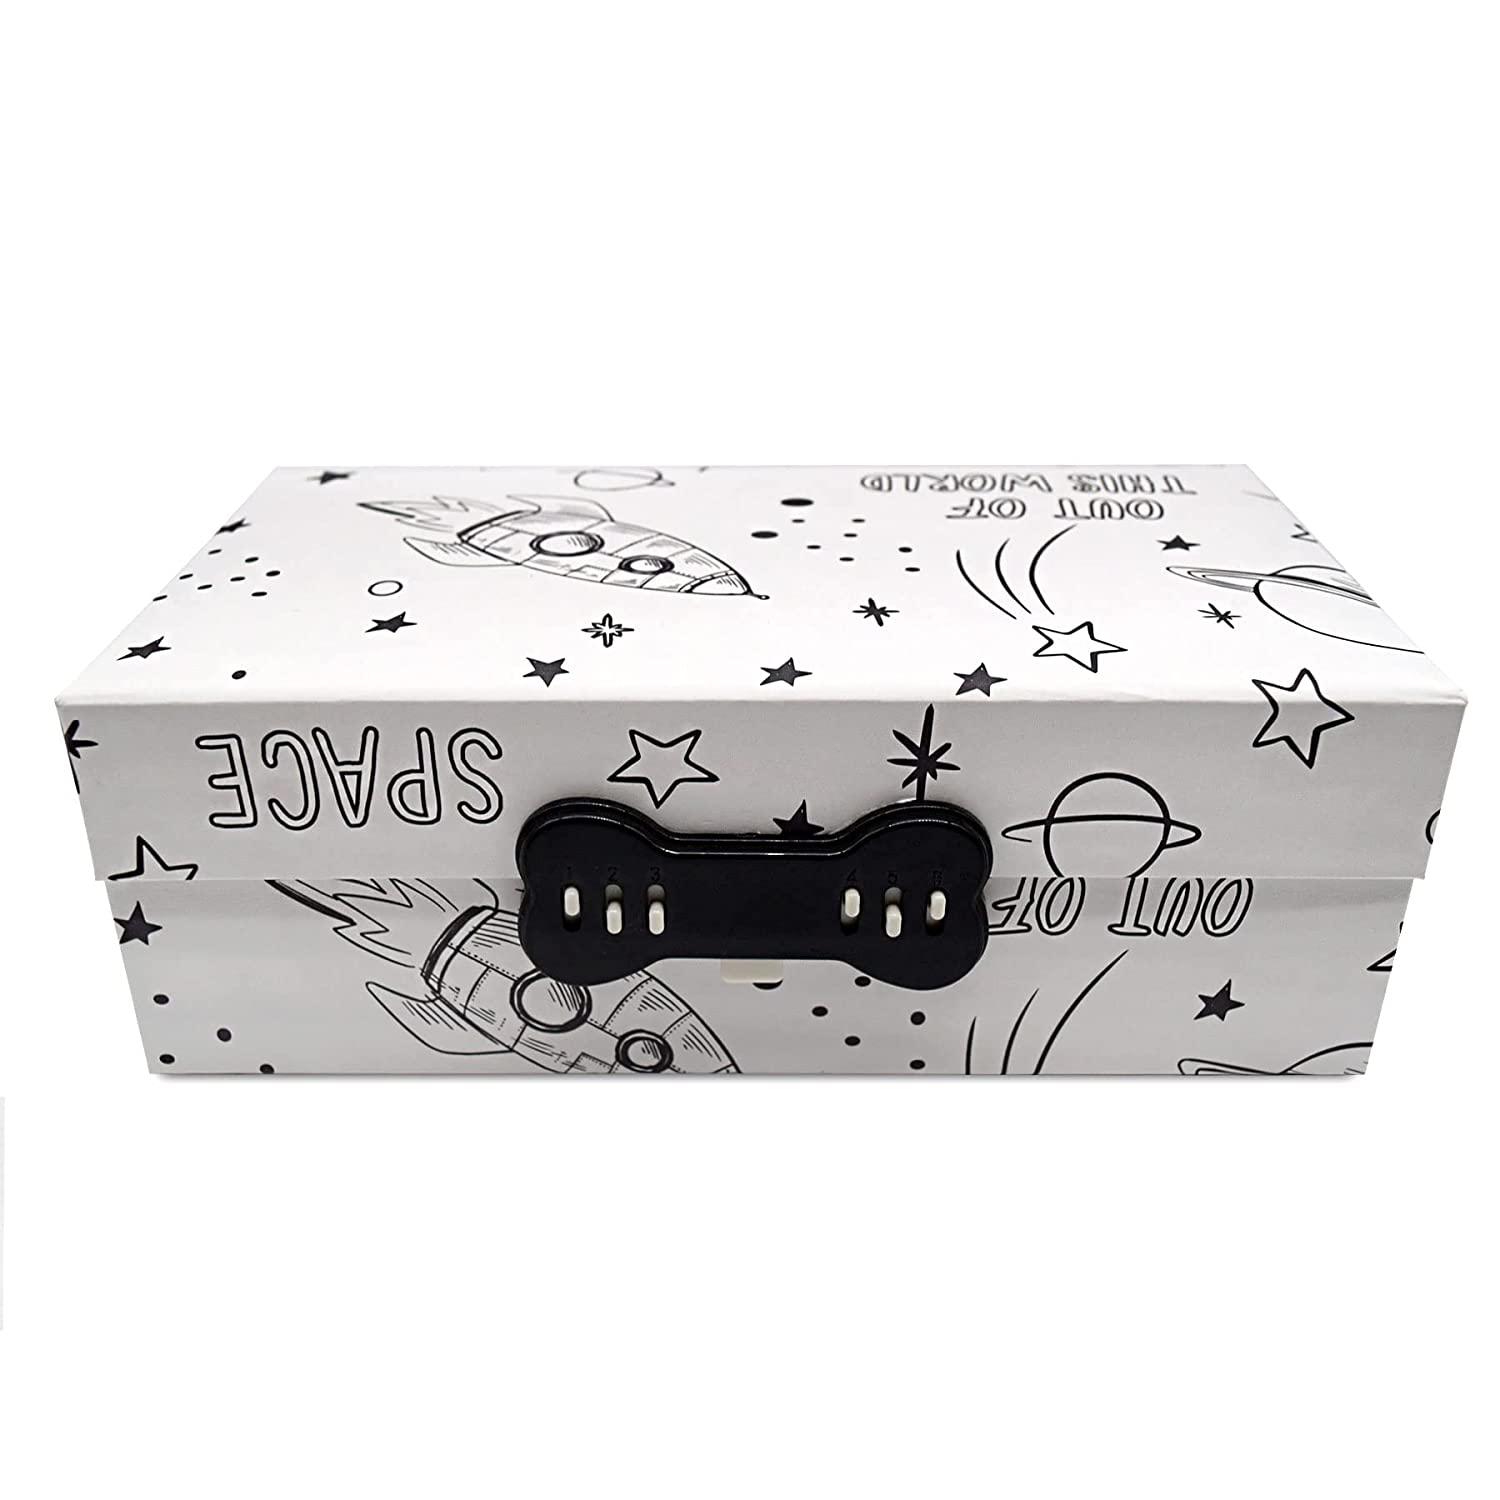 OccasionALL- Kids Jewelry Box 1 Pack Keepsake Paper Box for Boys and Girls, Safe with Combination Lock, Treasure Box for Cards White